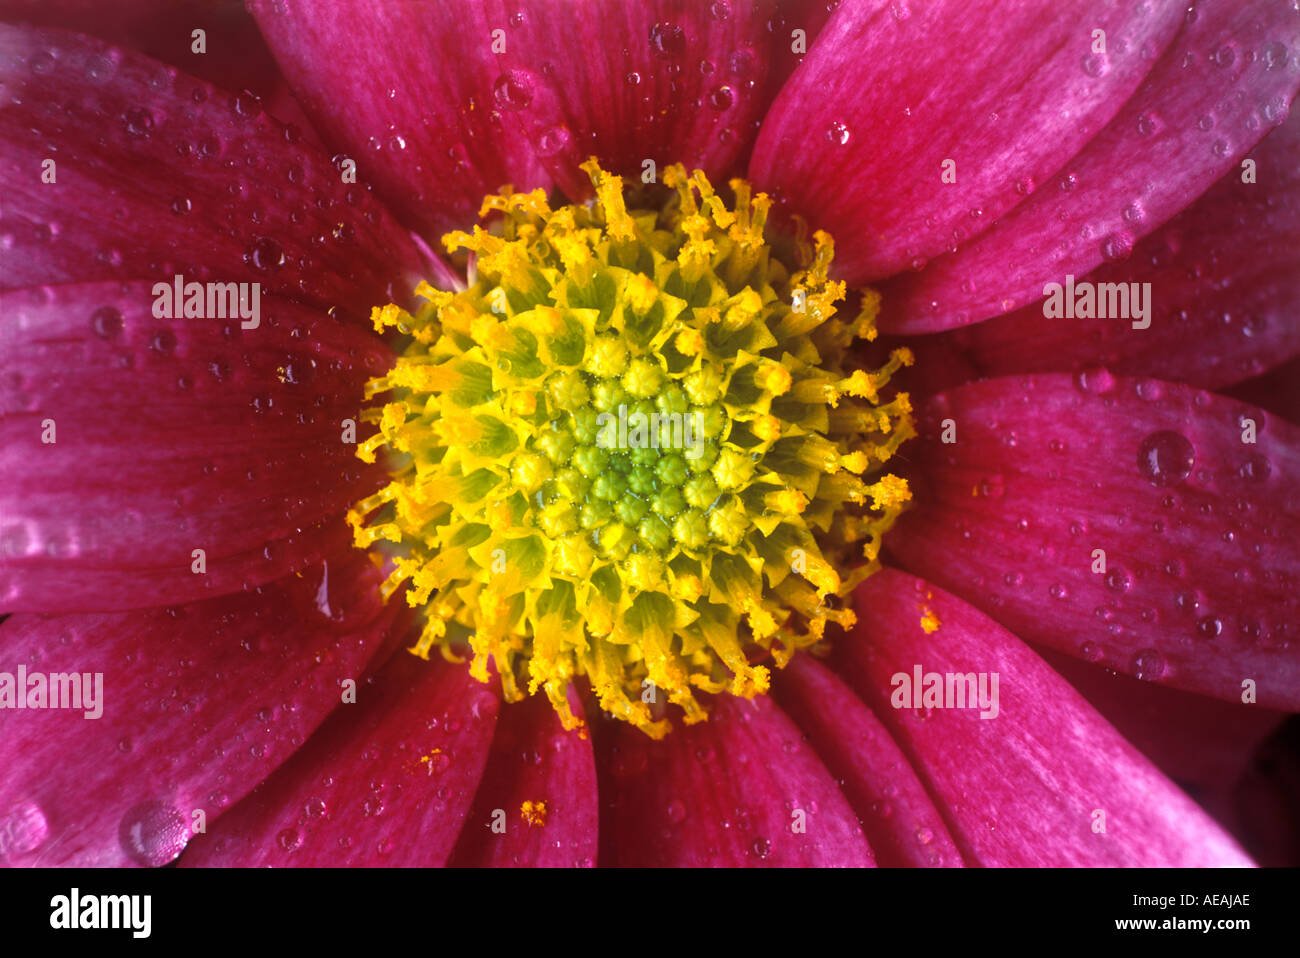 vivid pink flower with yellow centre macro close up Stock Photo